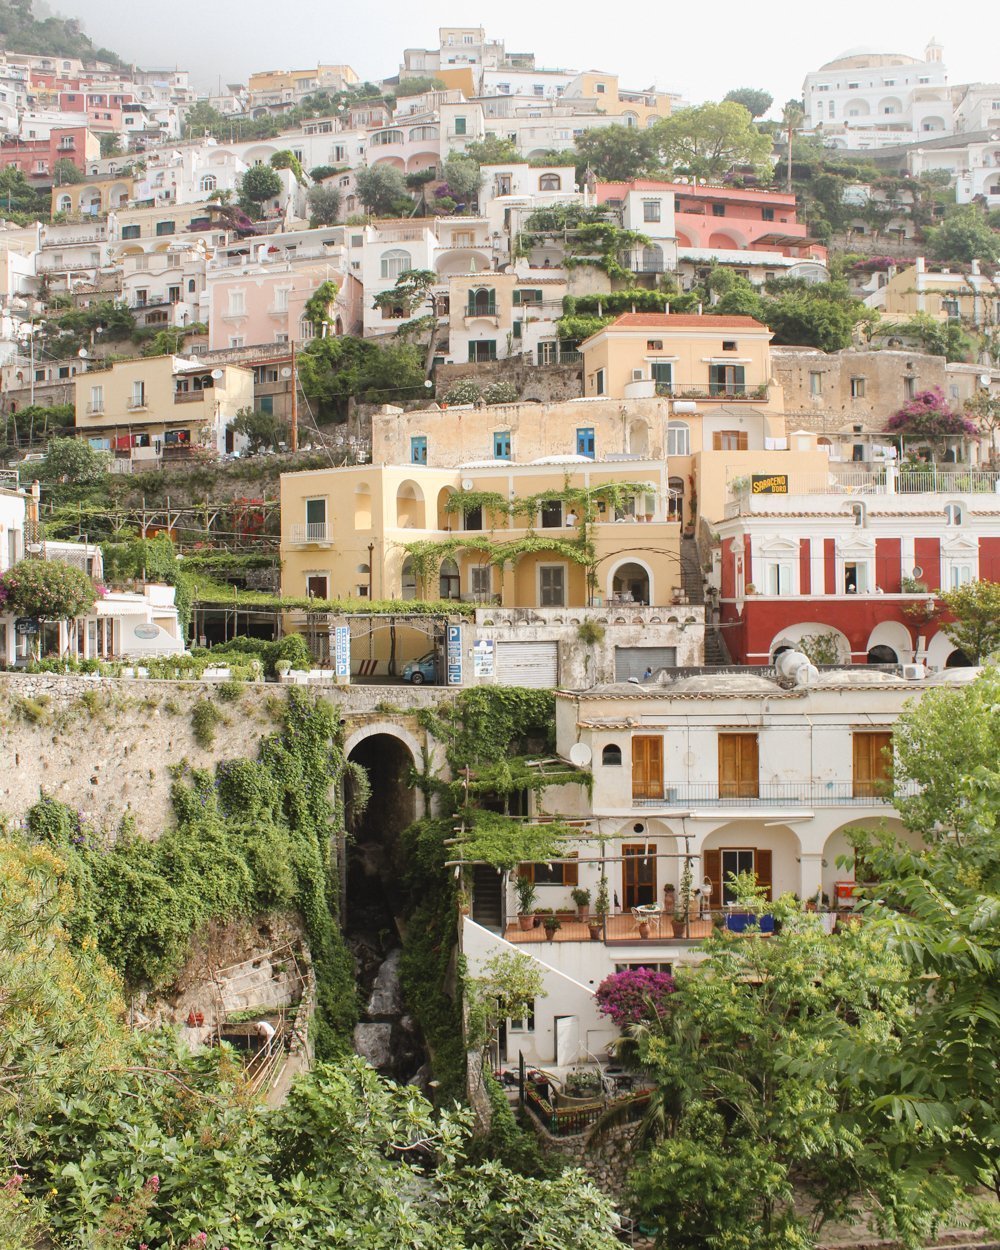 The 10 Best Day Trips from Naples, Italy